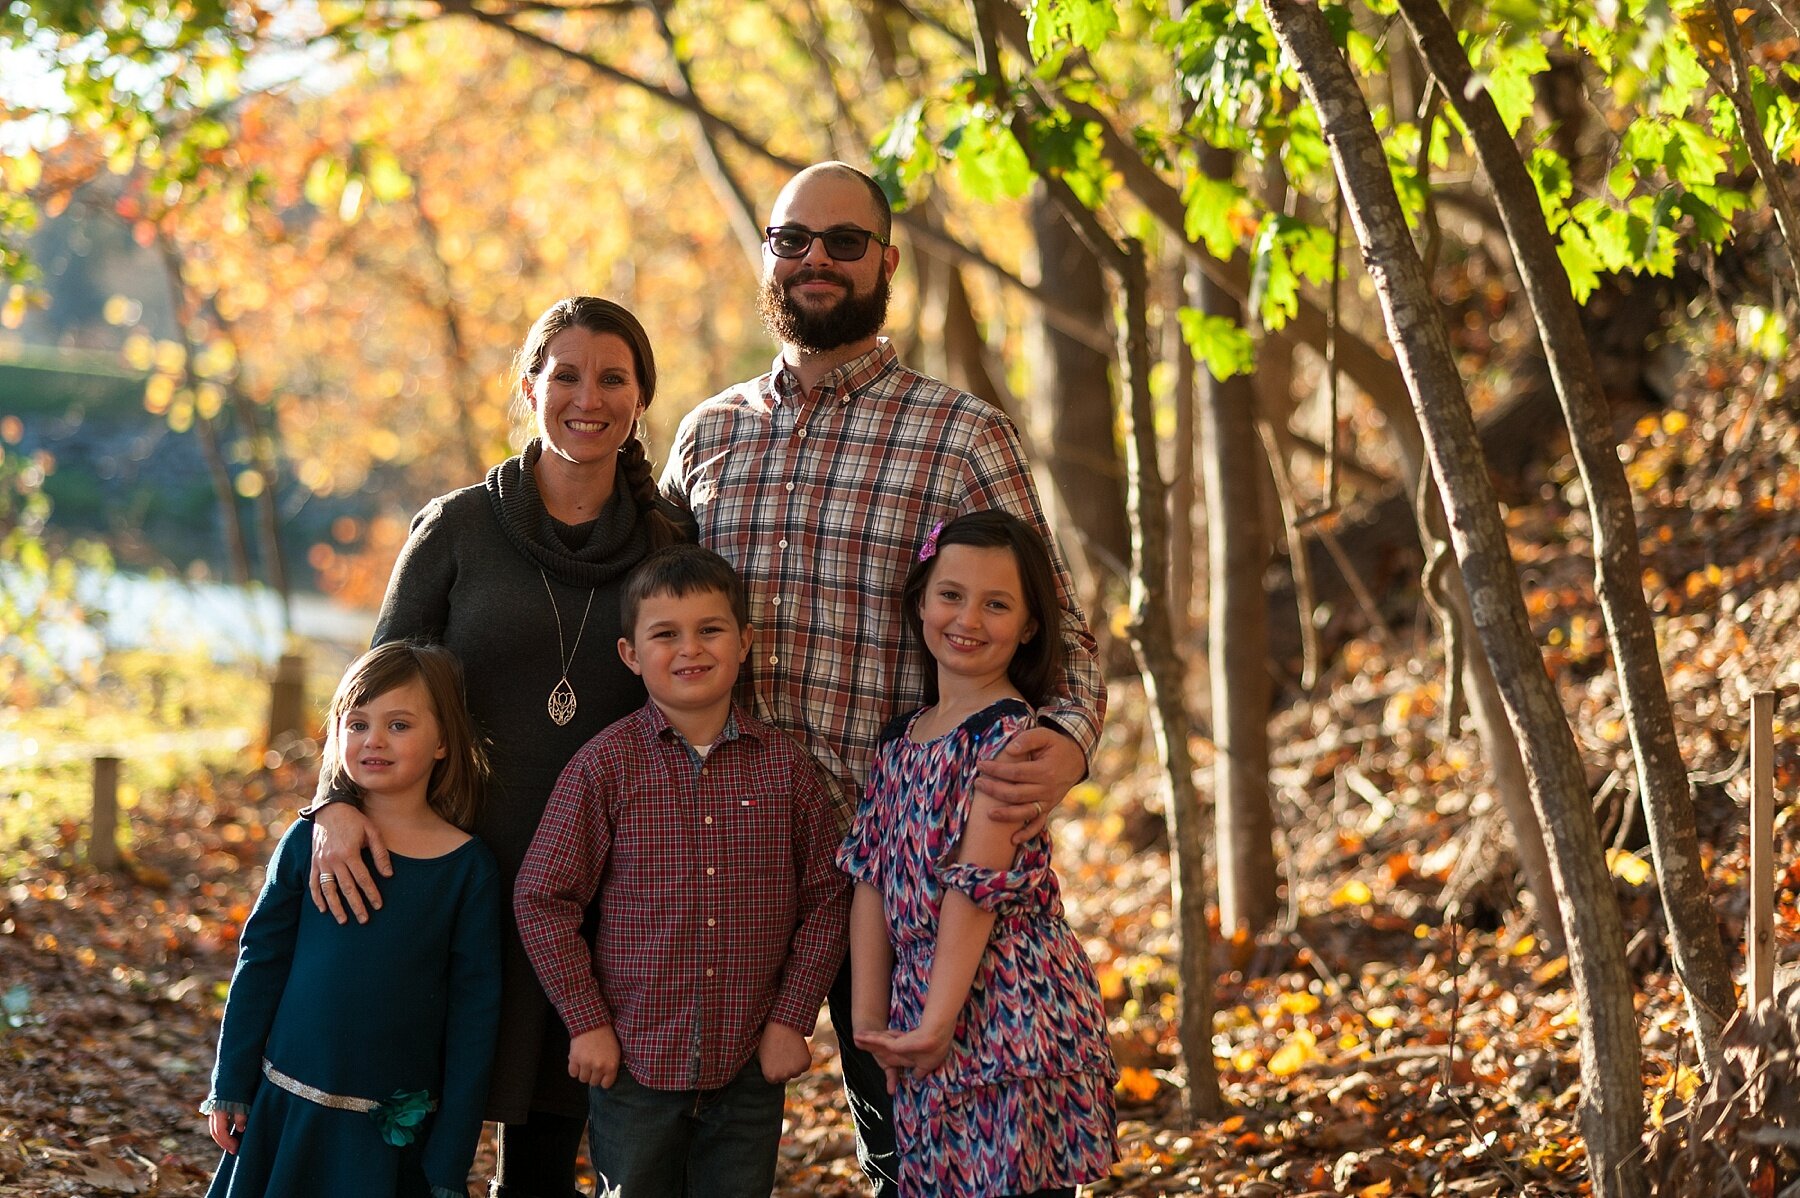 Wendy Zook Photography | Frederick Maryland family photographer, Frederick Family photographer, Maryland family photographer, MD family photographer, Frederick family photos, fall family photos in Frederick MD